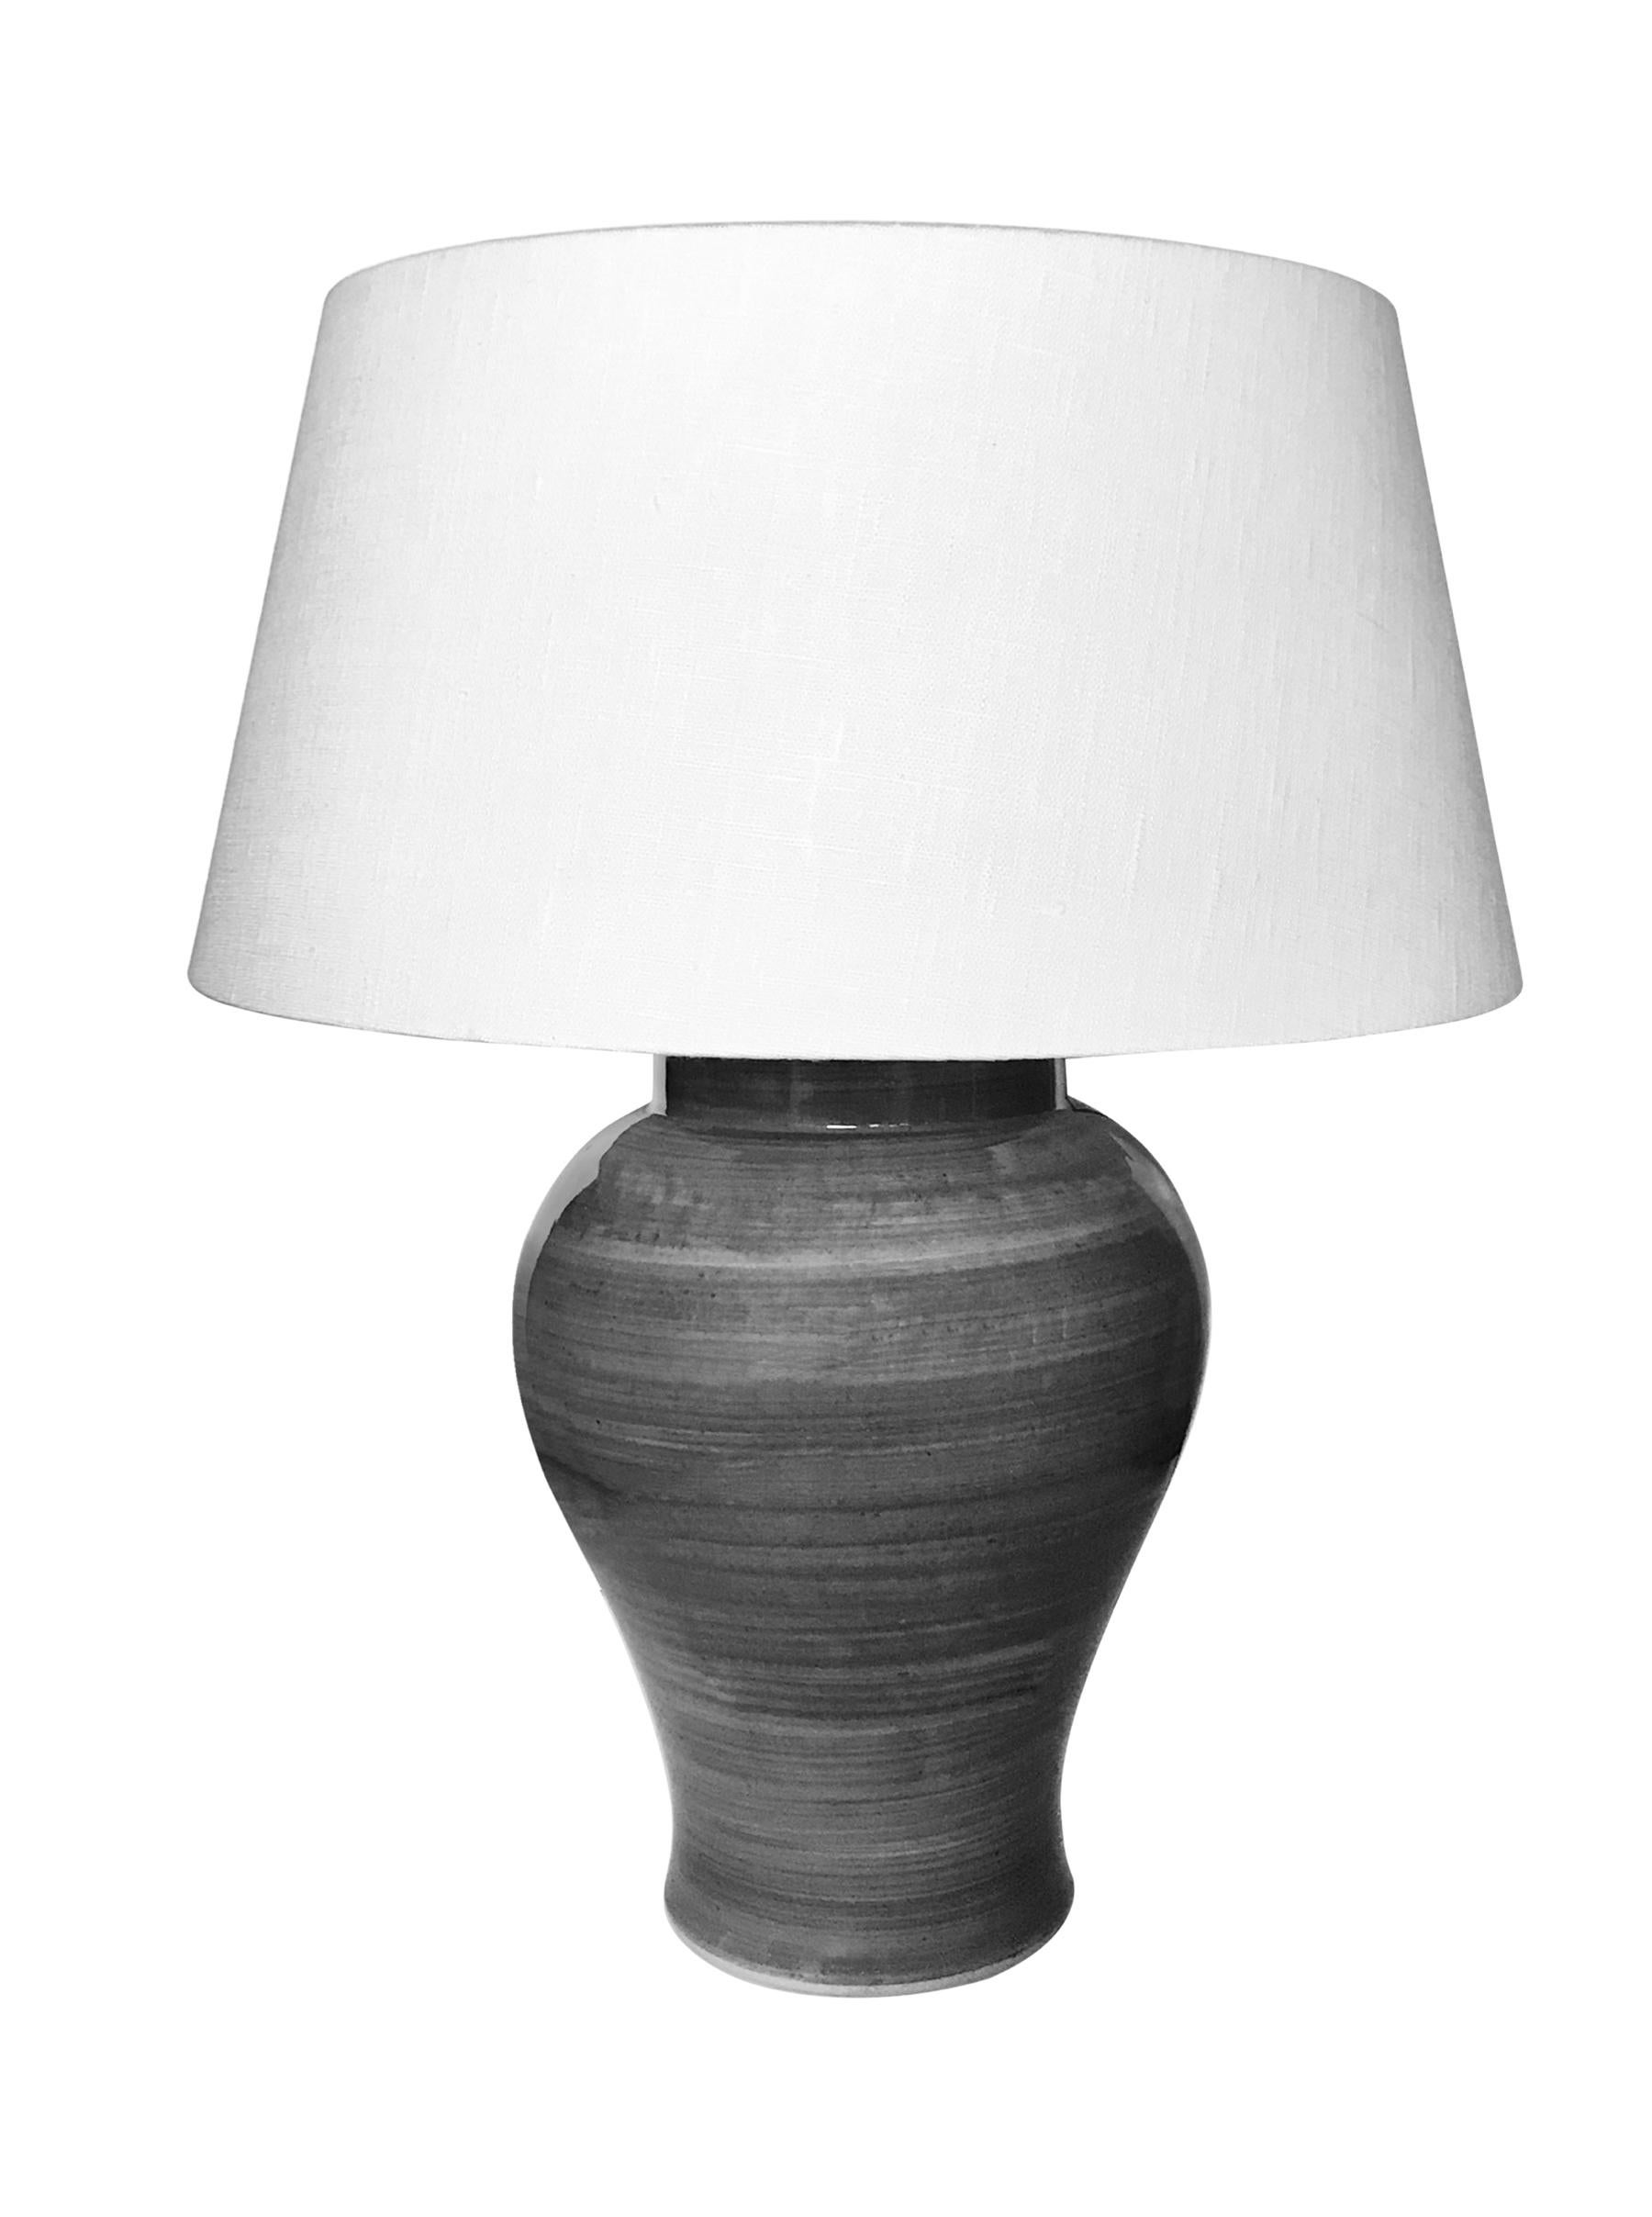 Pair of horizontally striated design Classic shape gray glazed lamps.
New Belgian linen shades.
Measures: Overall height 22.5